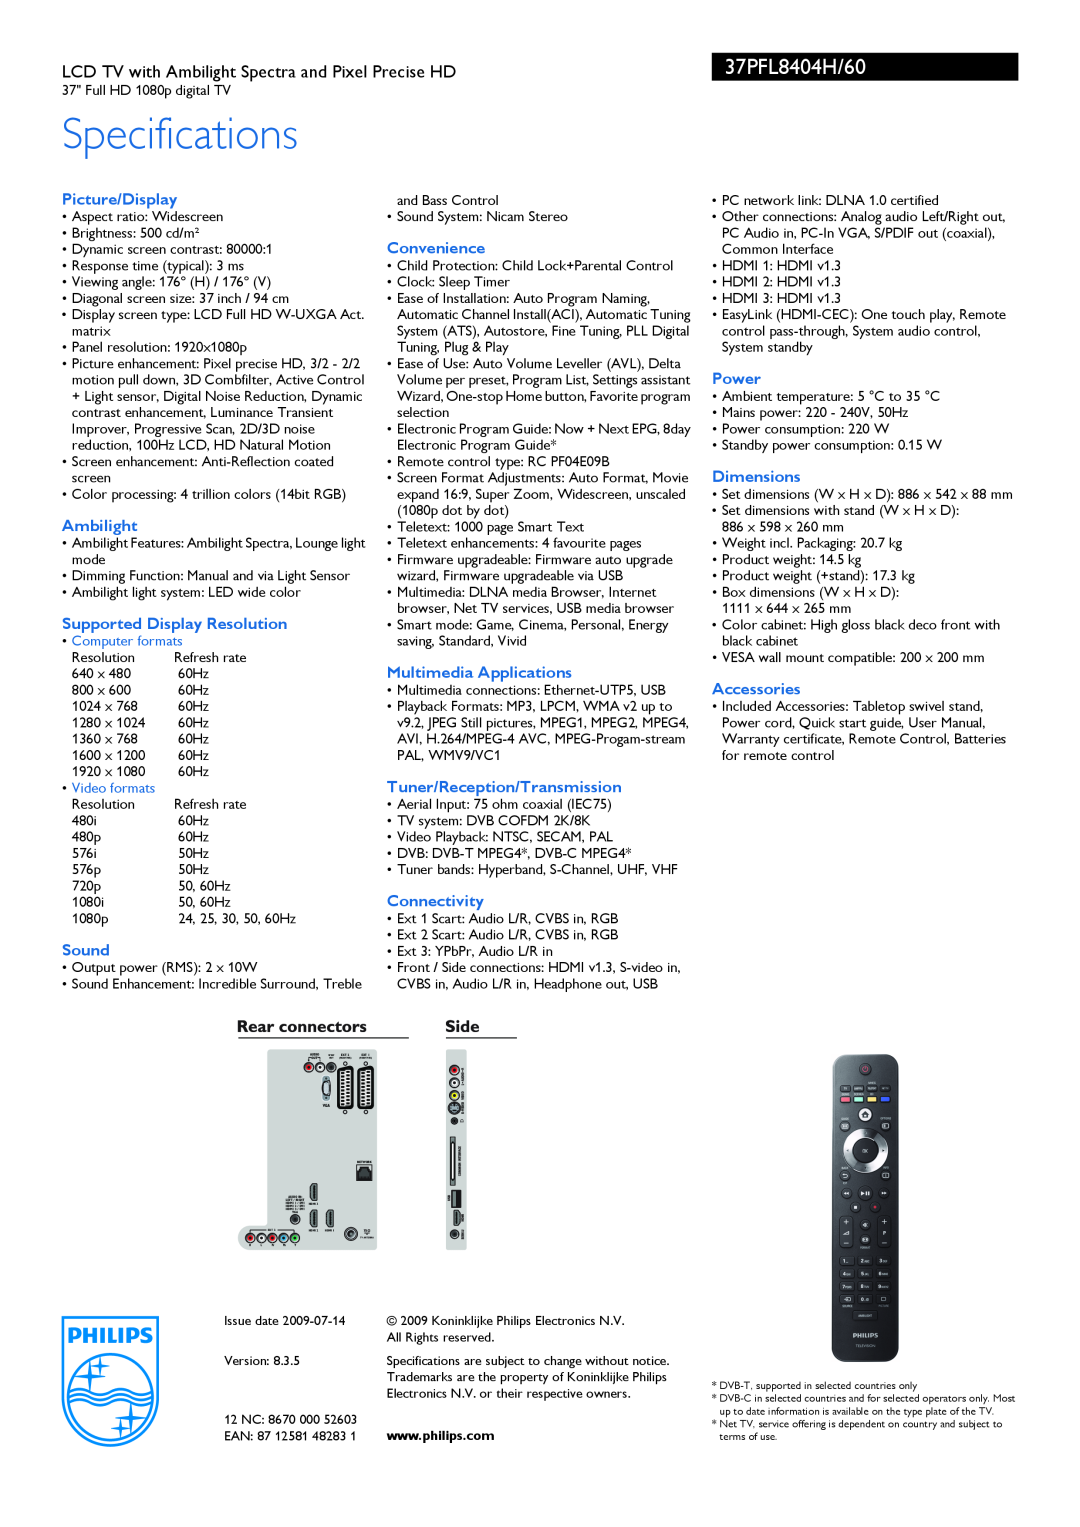 Philips 37PFL8404H/60 Specifications, Picture/Display, Ambilight, Supported Display Resolution, Sound, Convenience, Power 